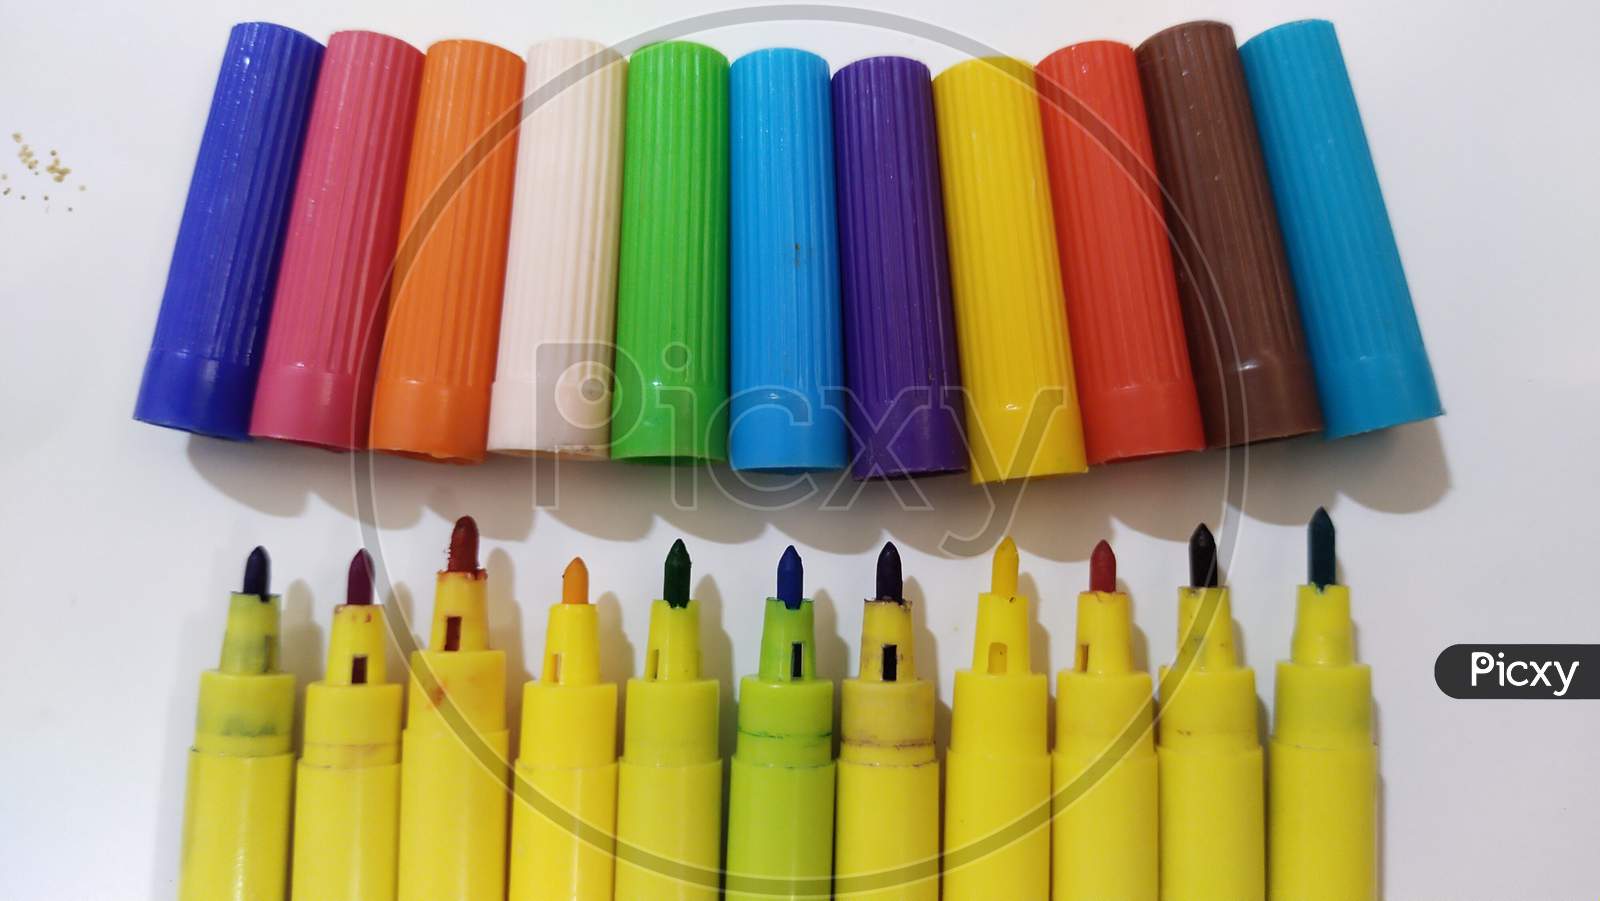 Image of Colorfull sketch pens or markers on isolated white  backgroundHL071229Picxy